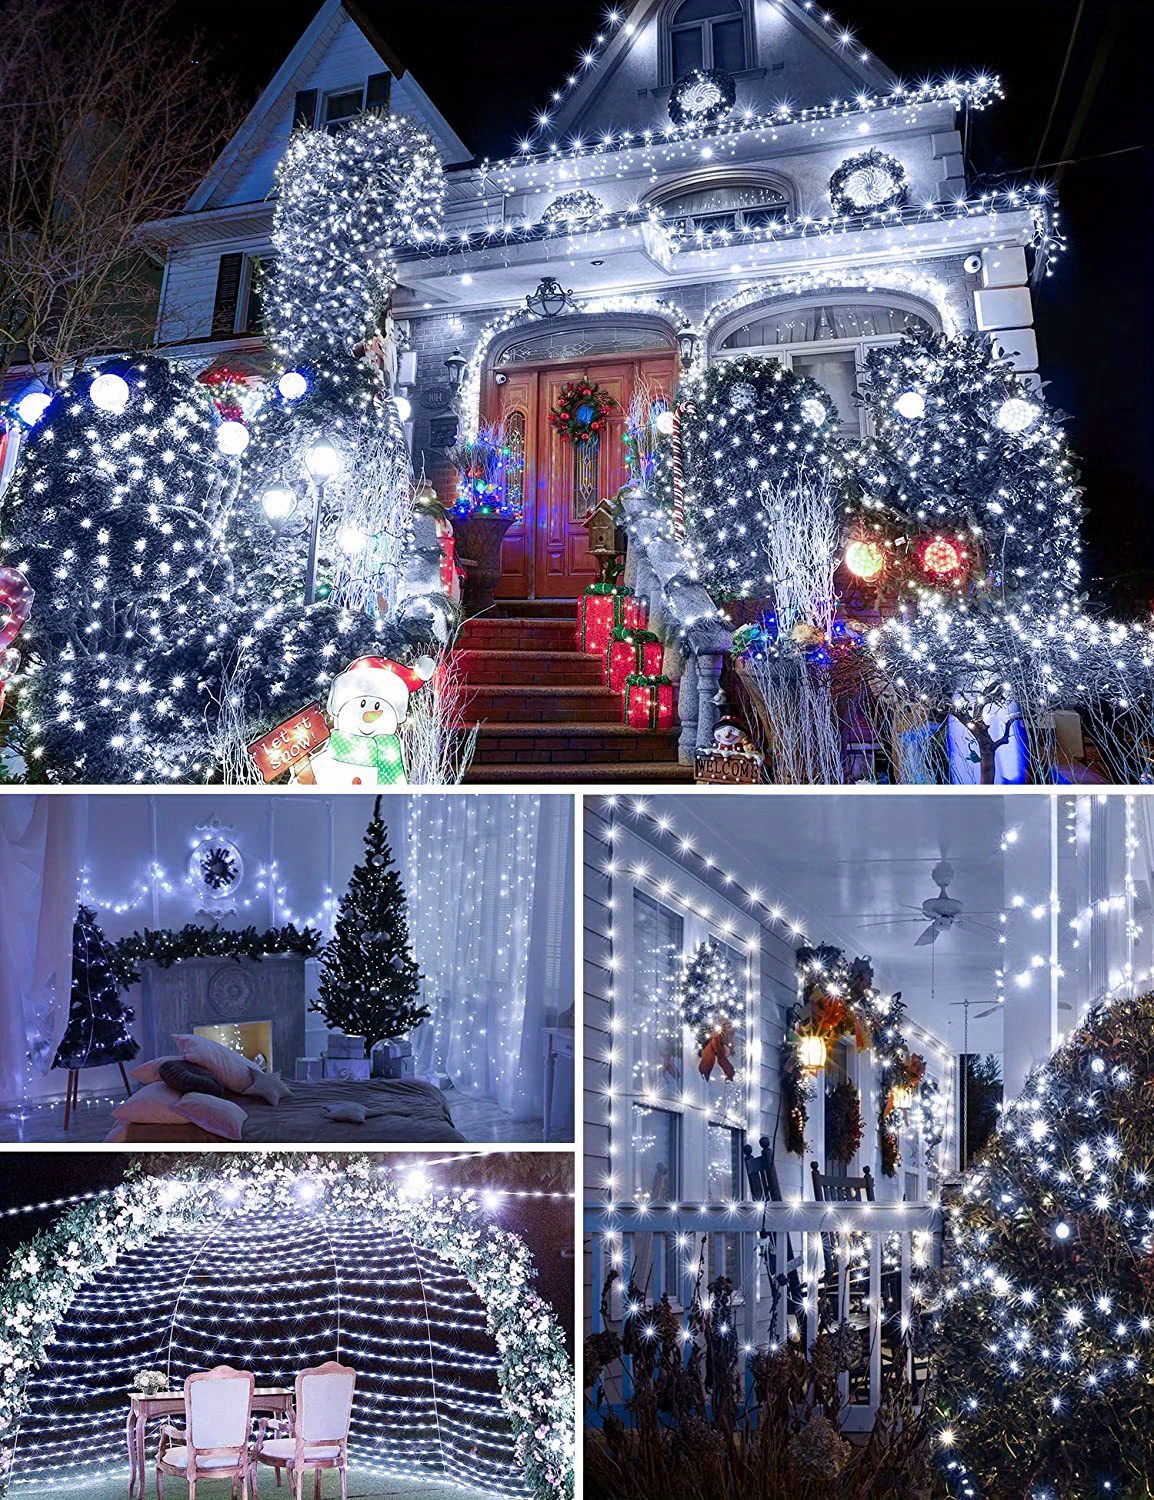 1 set 1000 led christmas lights 405ft outdoor string lights plug in fairy lights green wire with remote timer 8 lighting modes decorations lights for tree xmas indoor wedding garden multi colored warm white cool white details 13